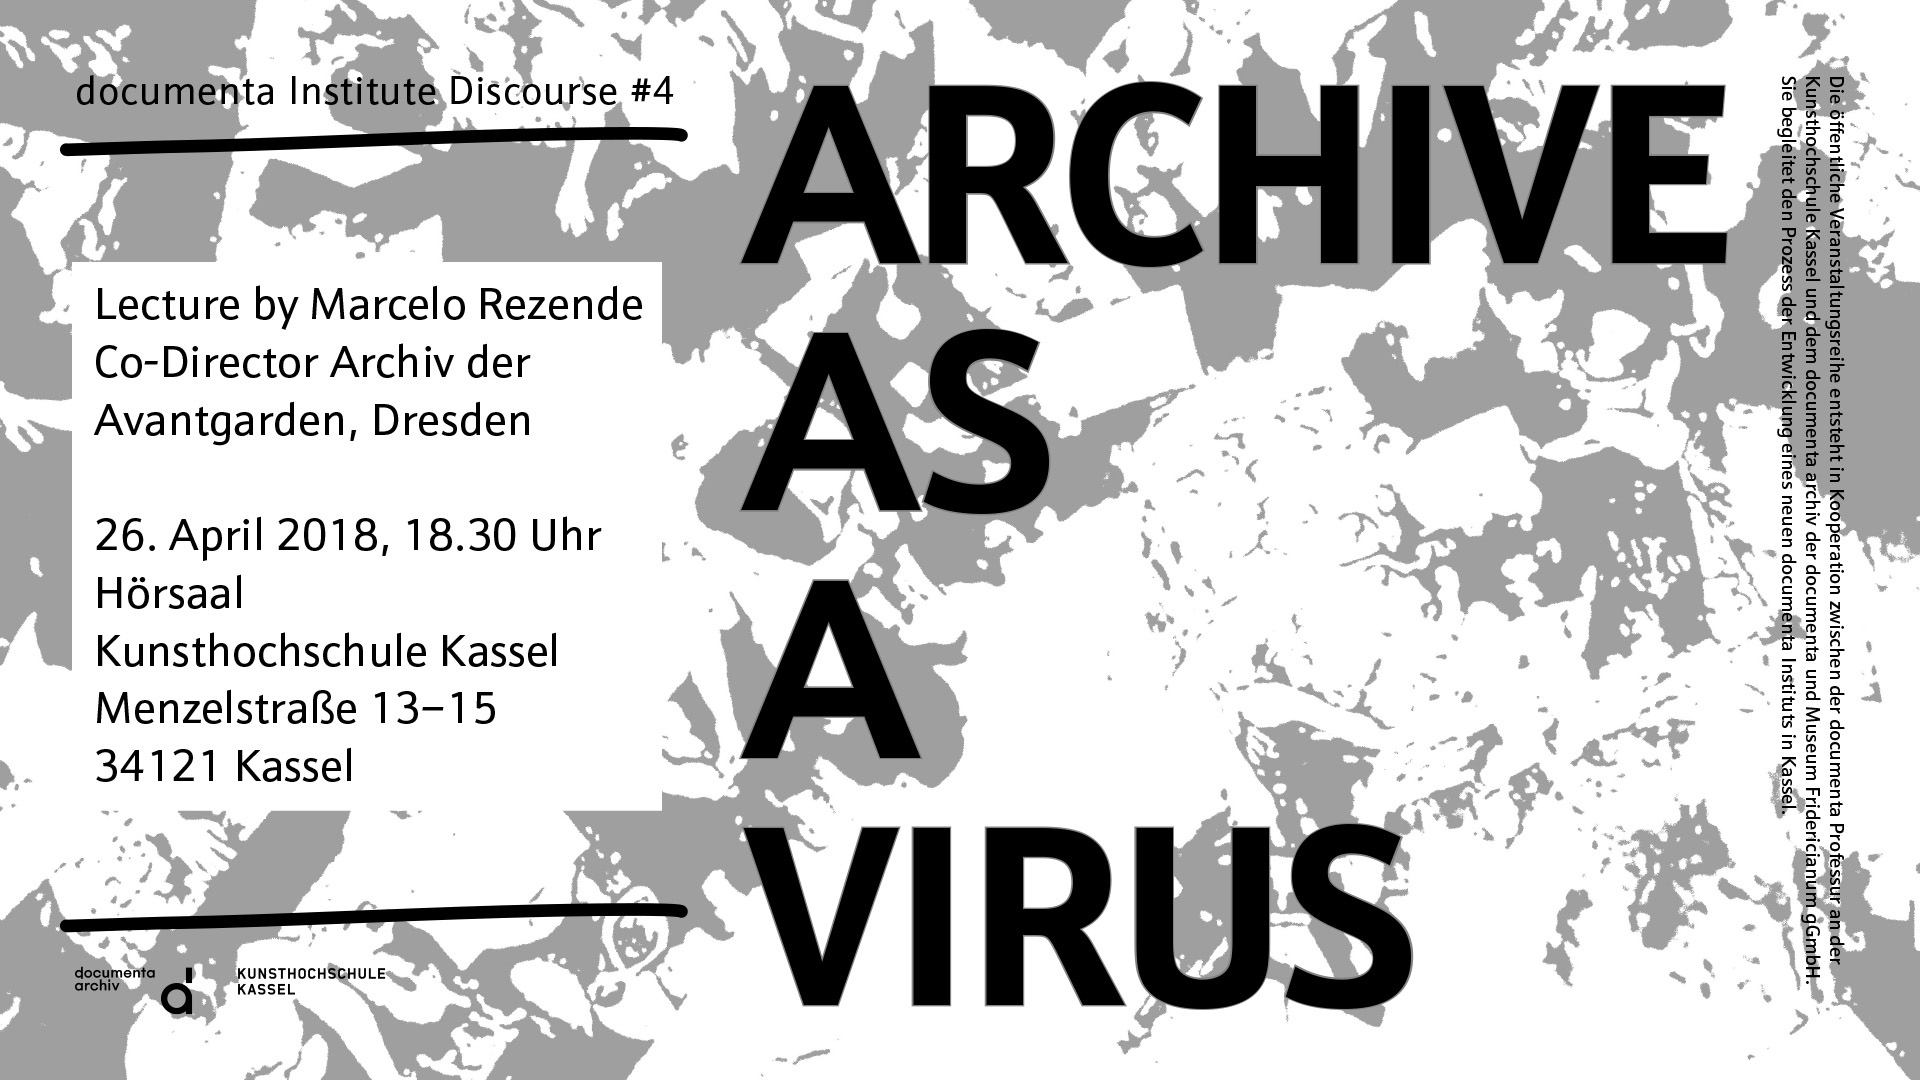 Archive as a virus